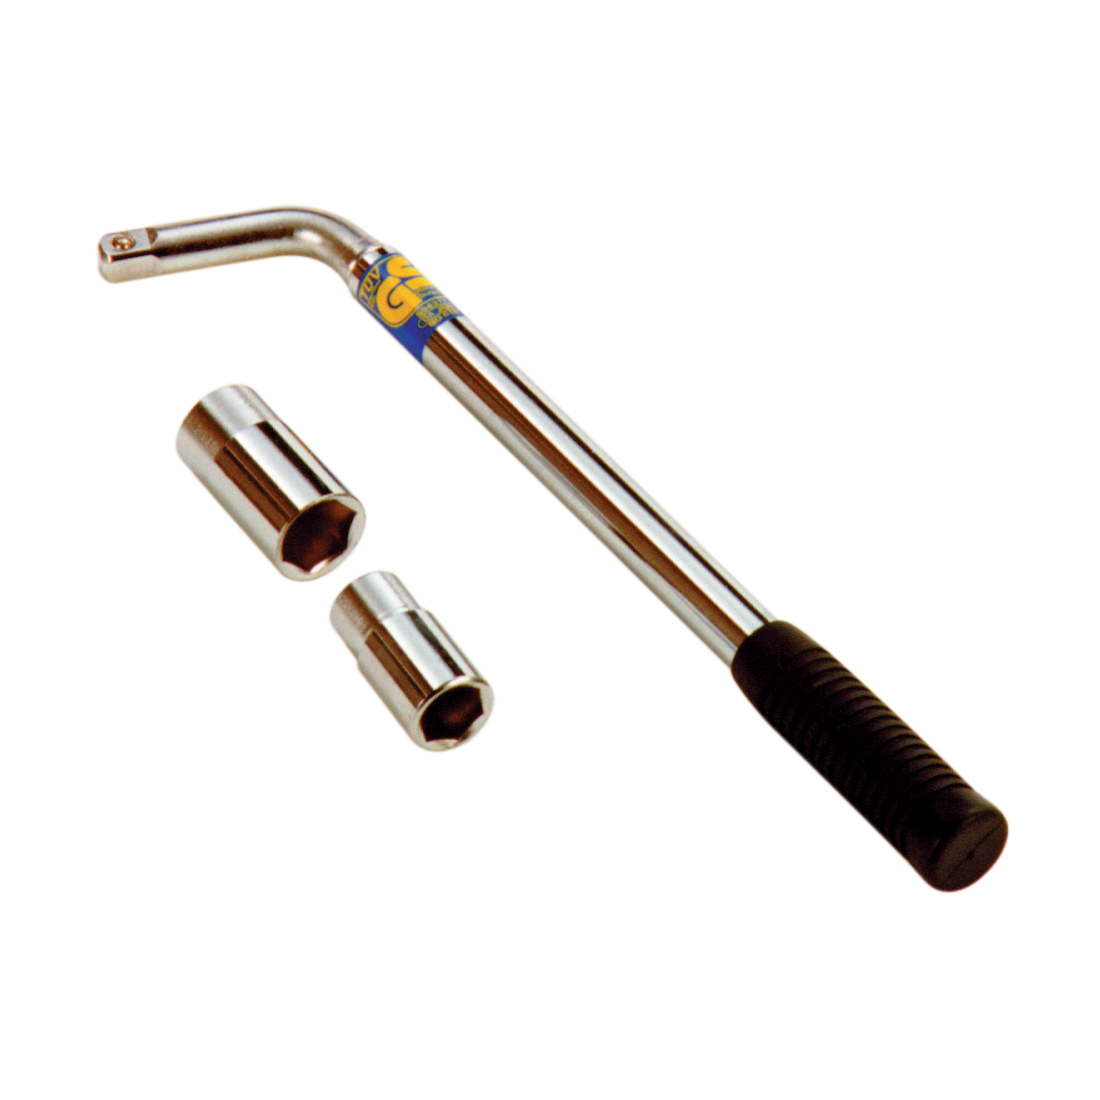 Wheel wrench 17-19 and 21-23 mm Carpoint thumb